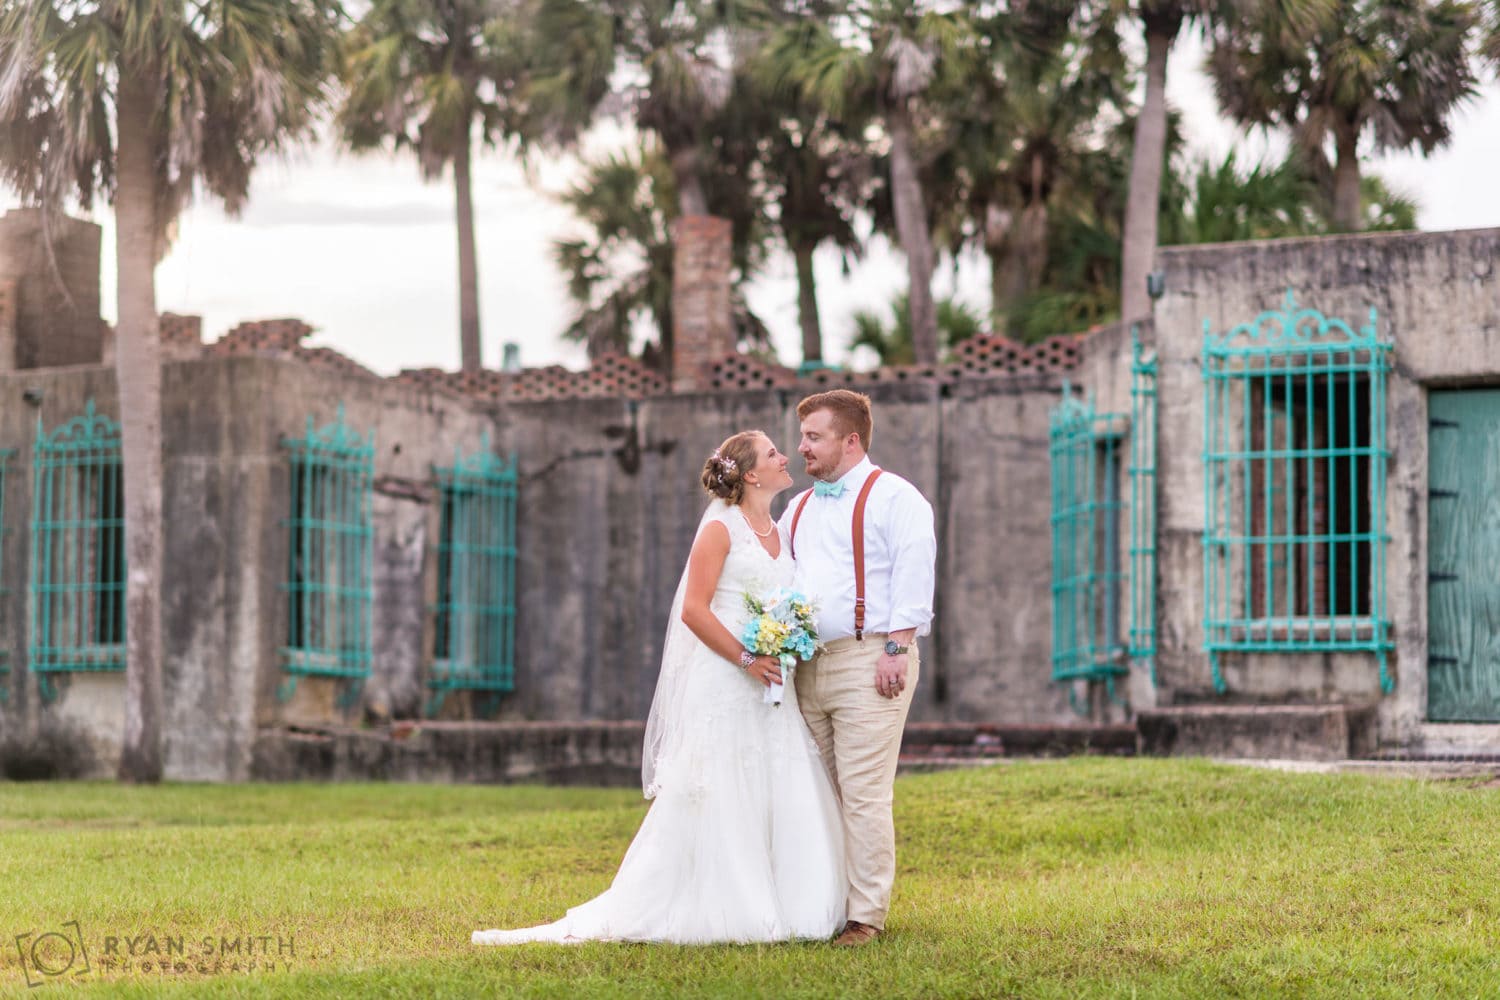 Rainy summer wedding day at the Atalaya Castle in